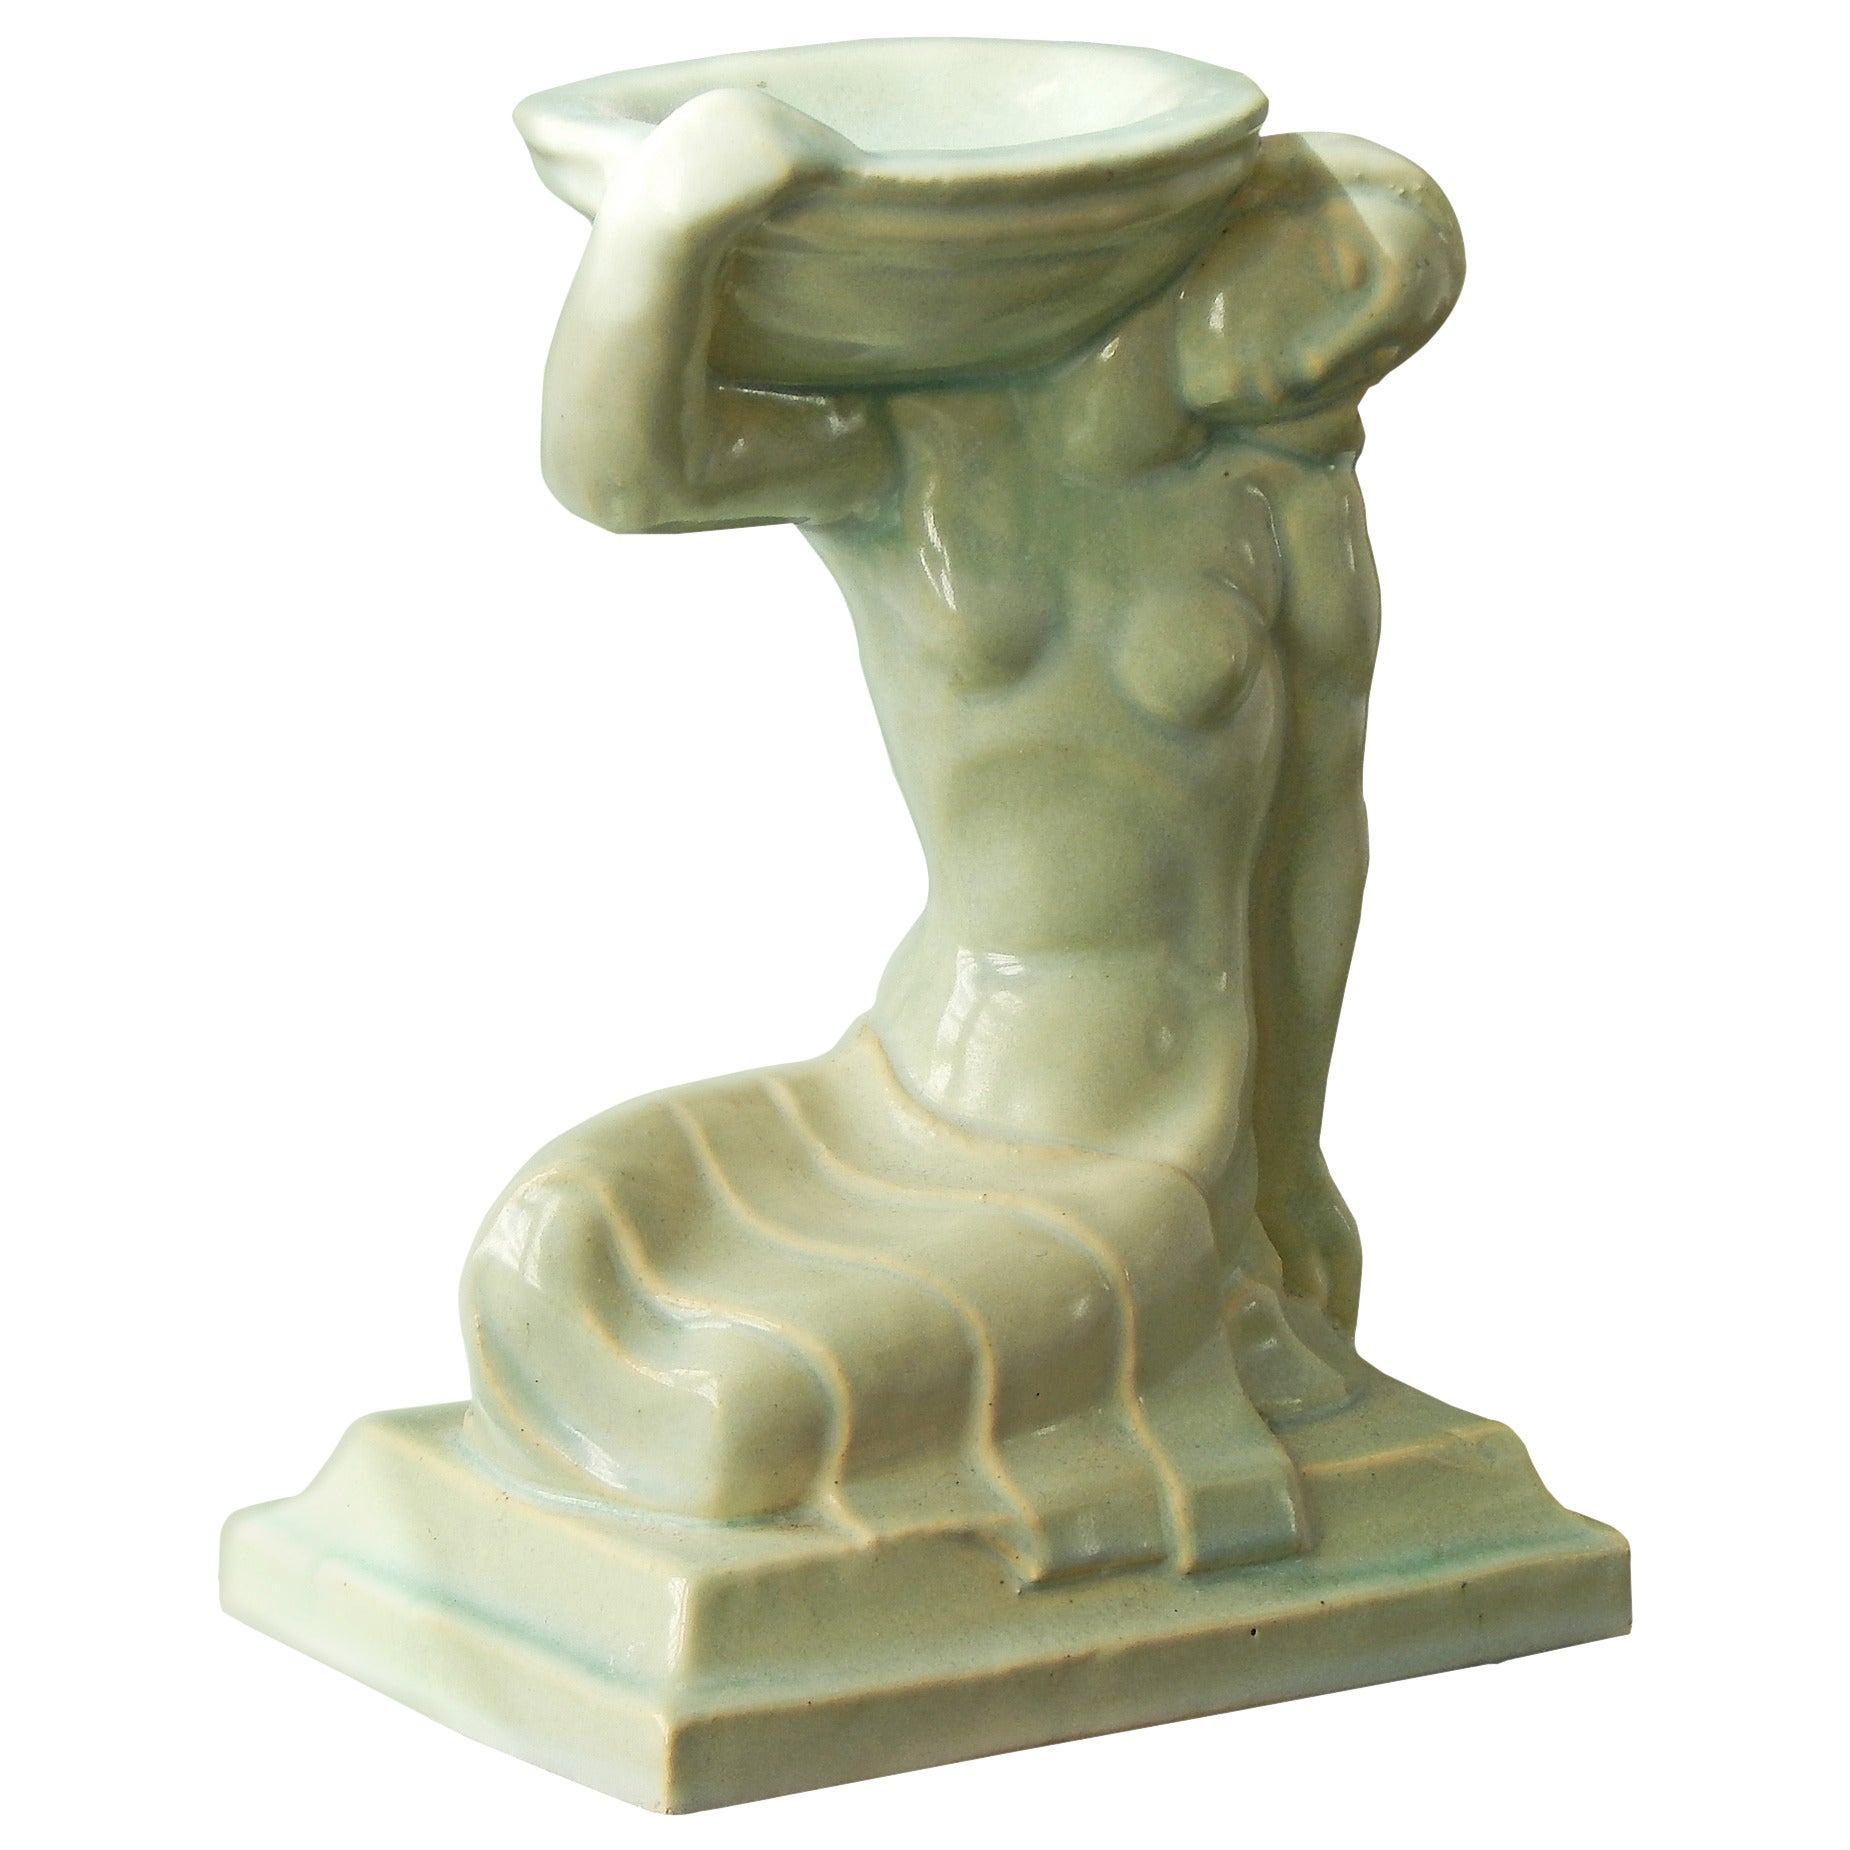 "Nude with Bowl, " Rare Art Deco Sculpture by Solon for Amer, Encaustic For Sale